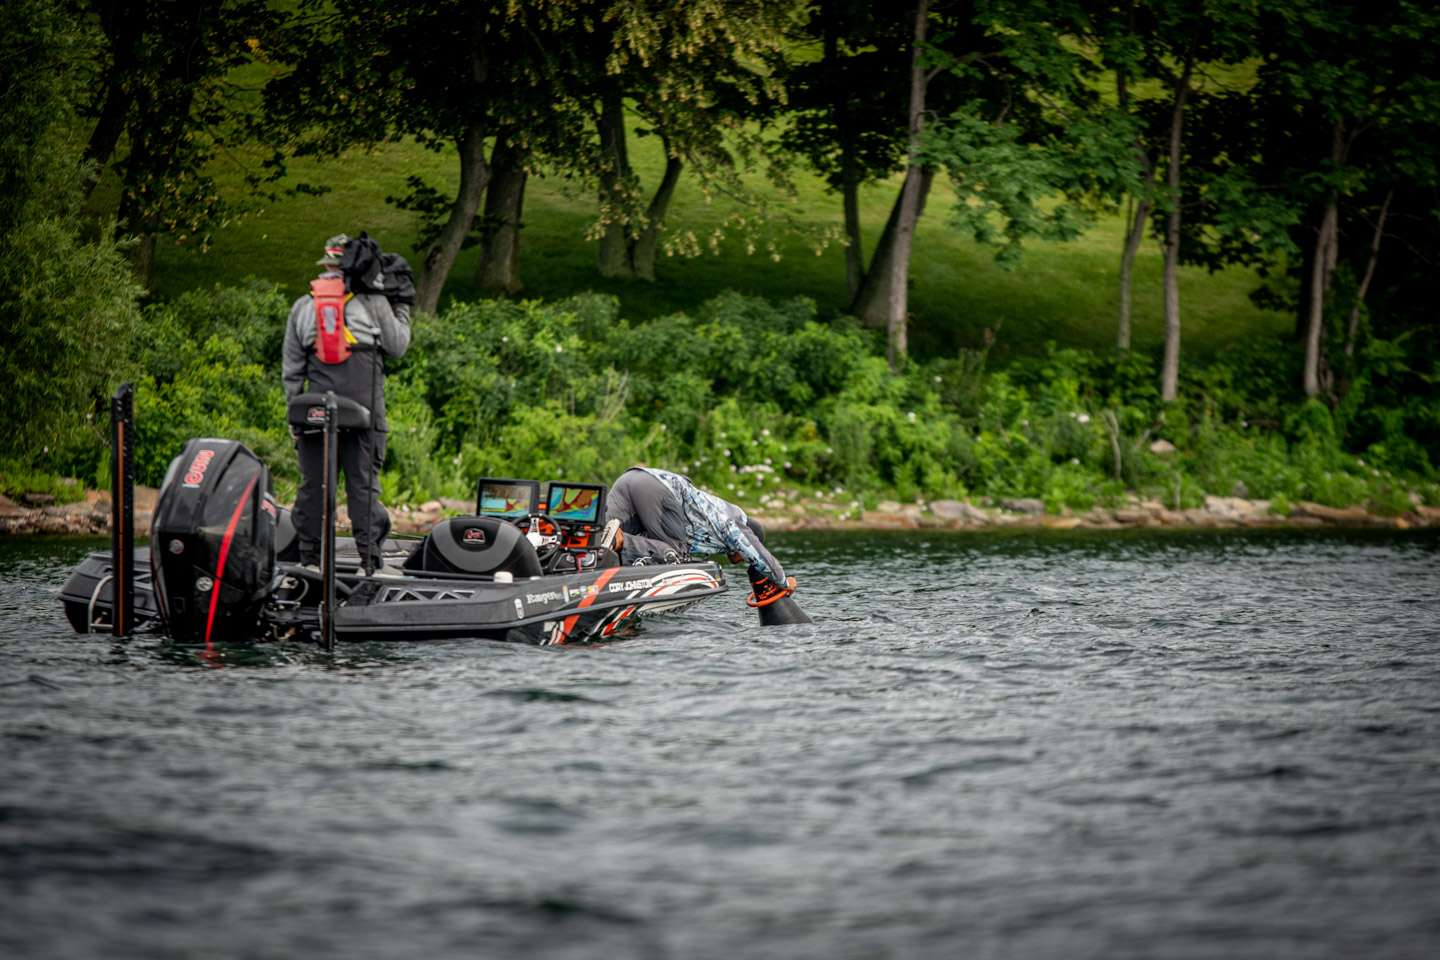 Check out Canadian angler Cory Johnston's Championship Sunday at the Farmers Insurance Bassmaster Elite at St. Lawrence River.